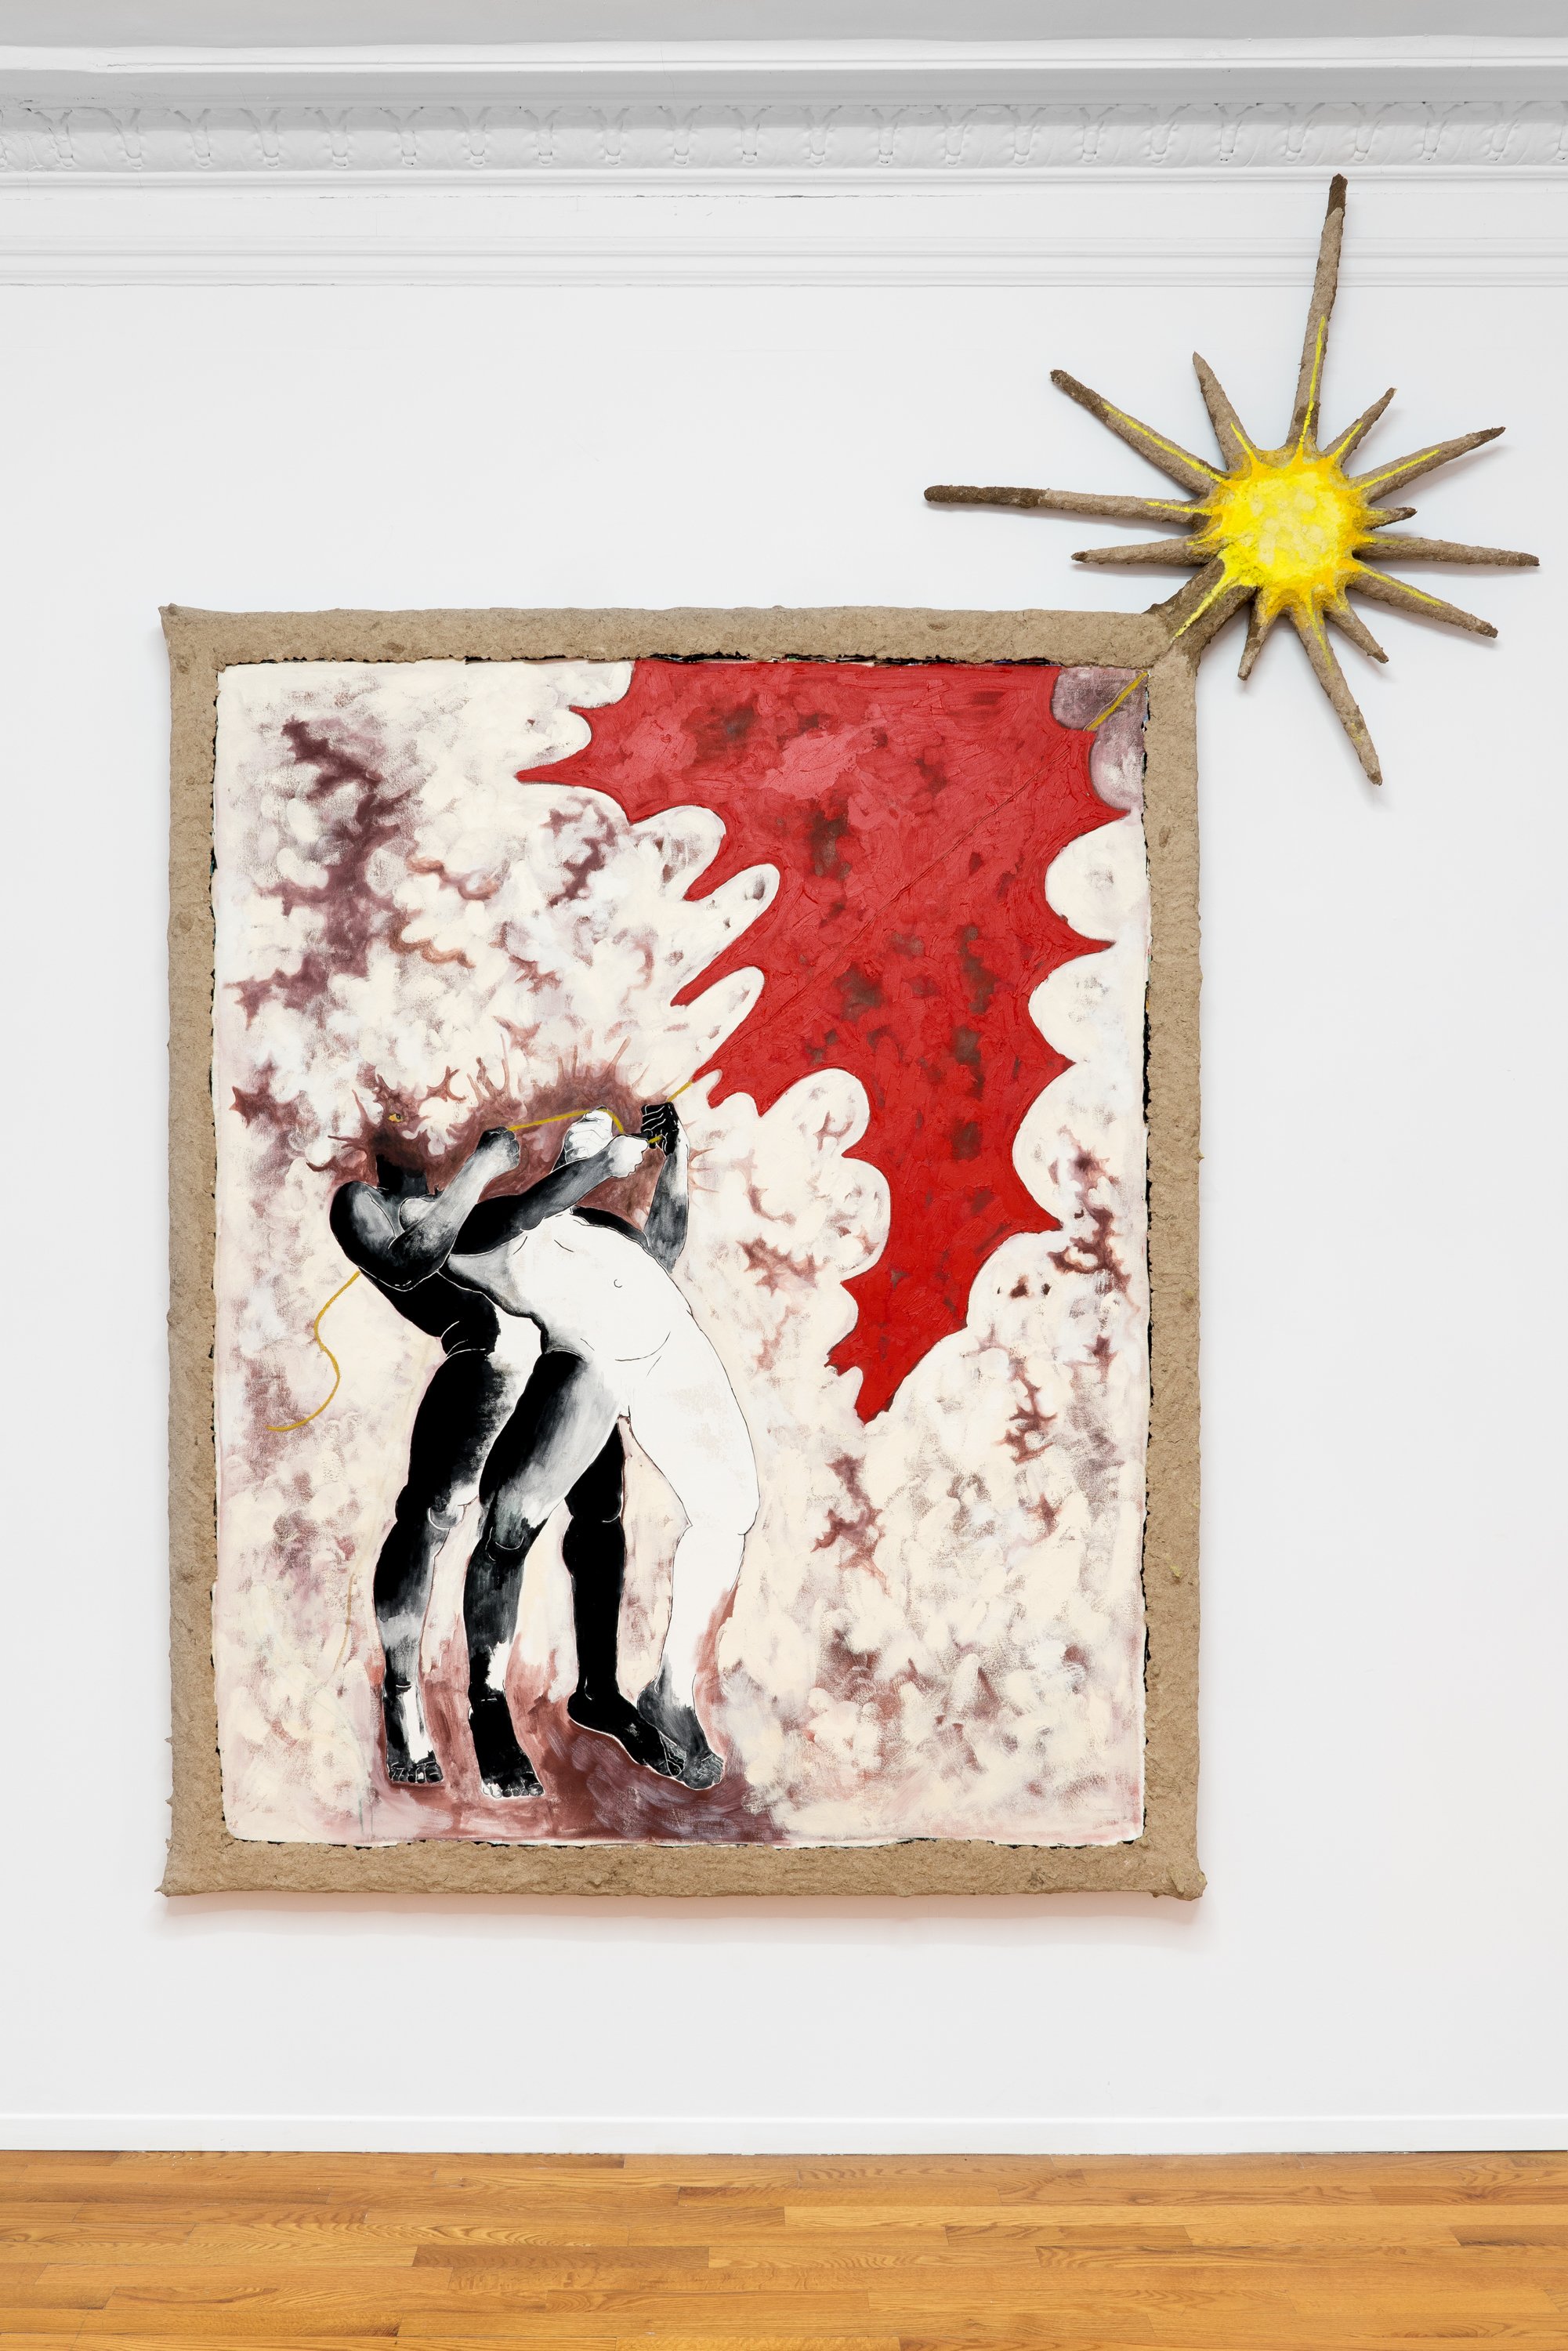 Pangee_OrekaJames_and then it appeared, looming; a crimson quarrel_2022_oil and acrylic on canvas, wood and paper mache_106×83×2inches.jpg